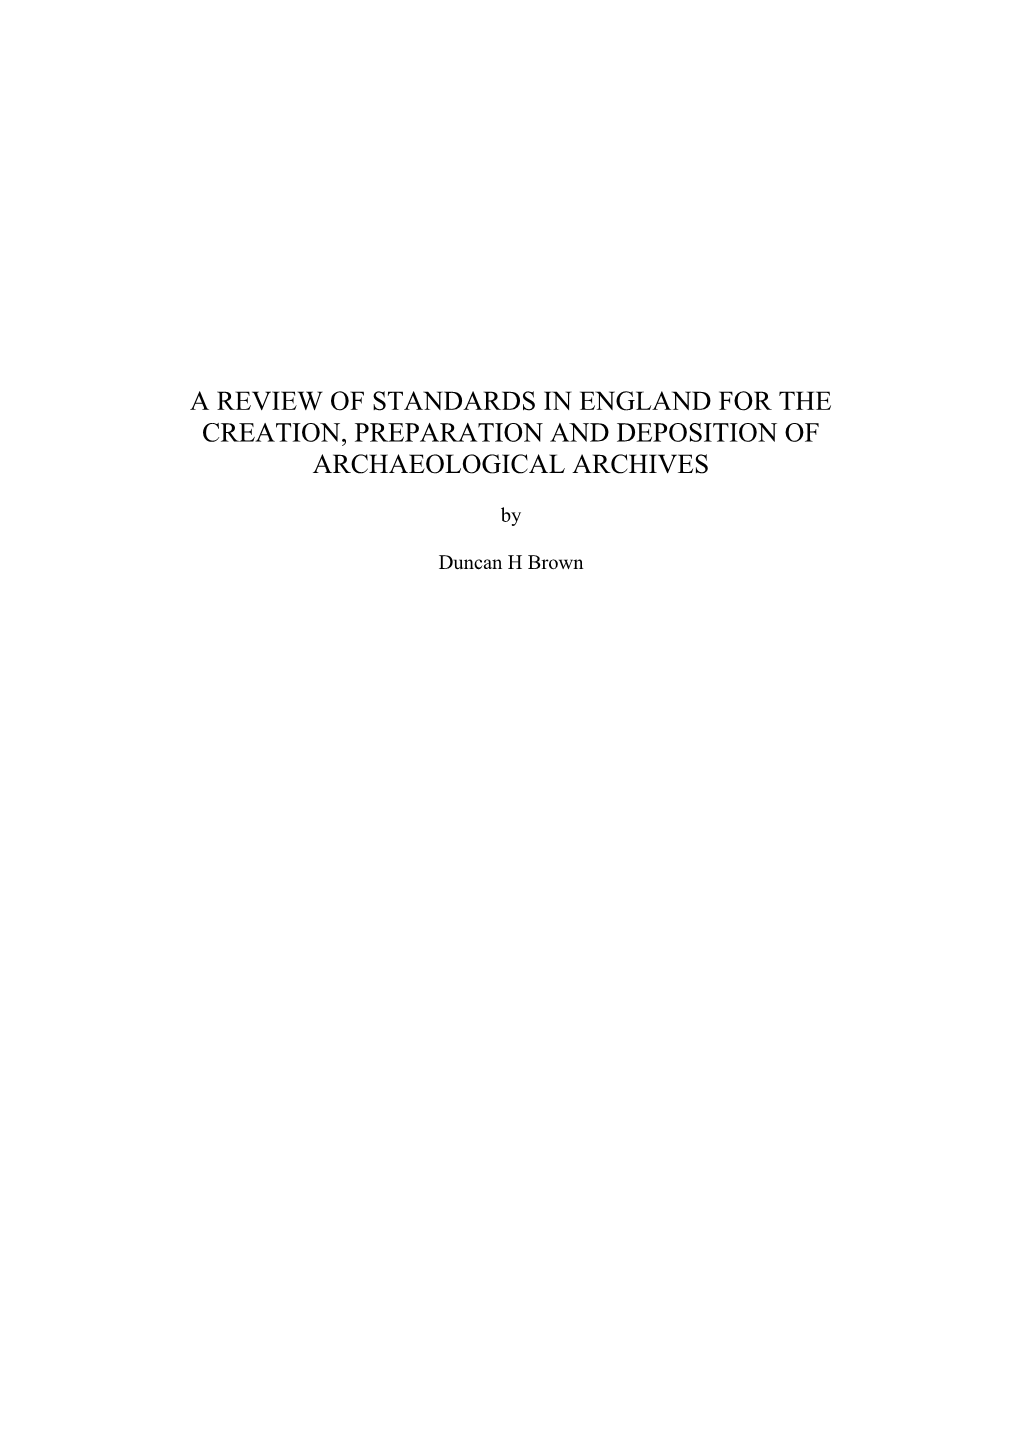 A Review of Standards in England for the Creation, Preparation and Deposition of Archaeological